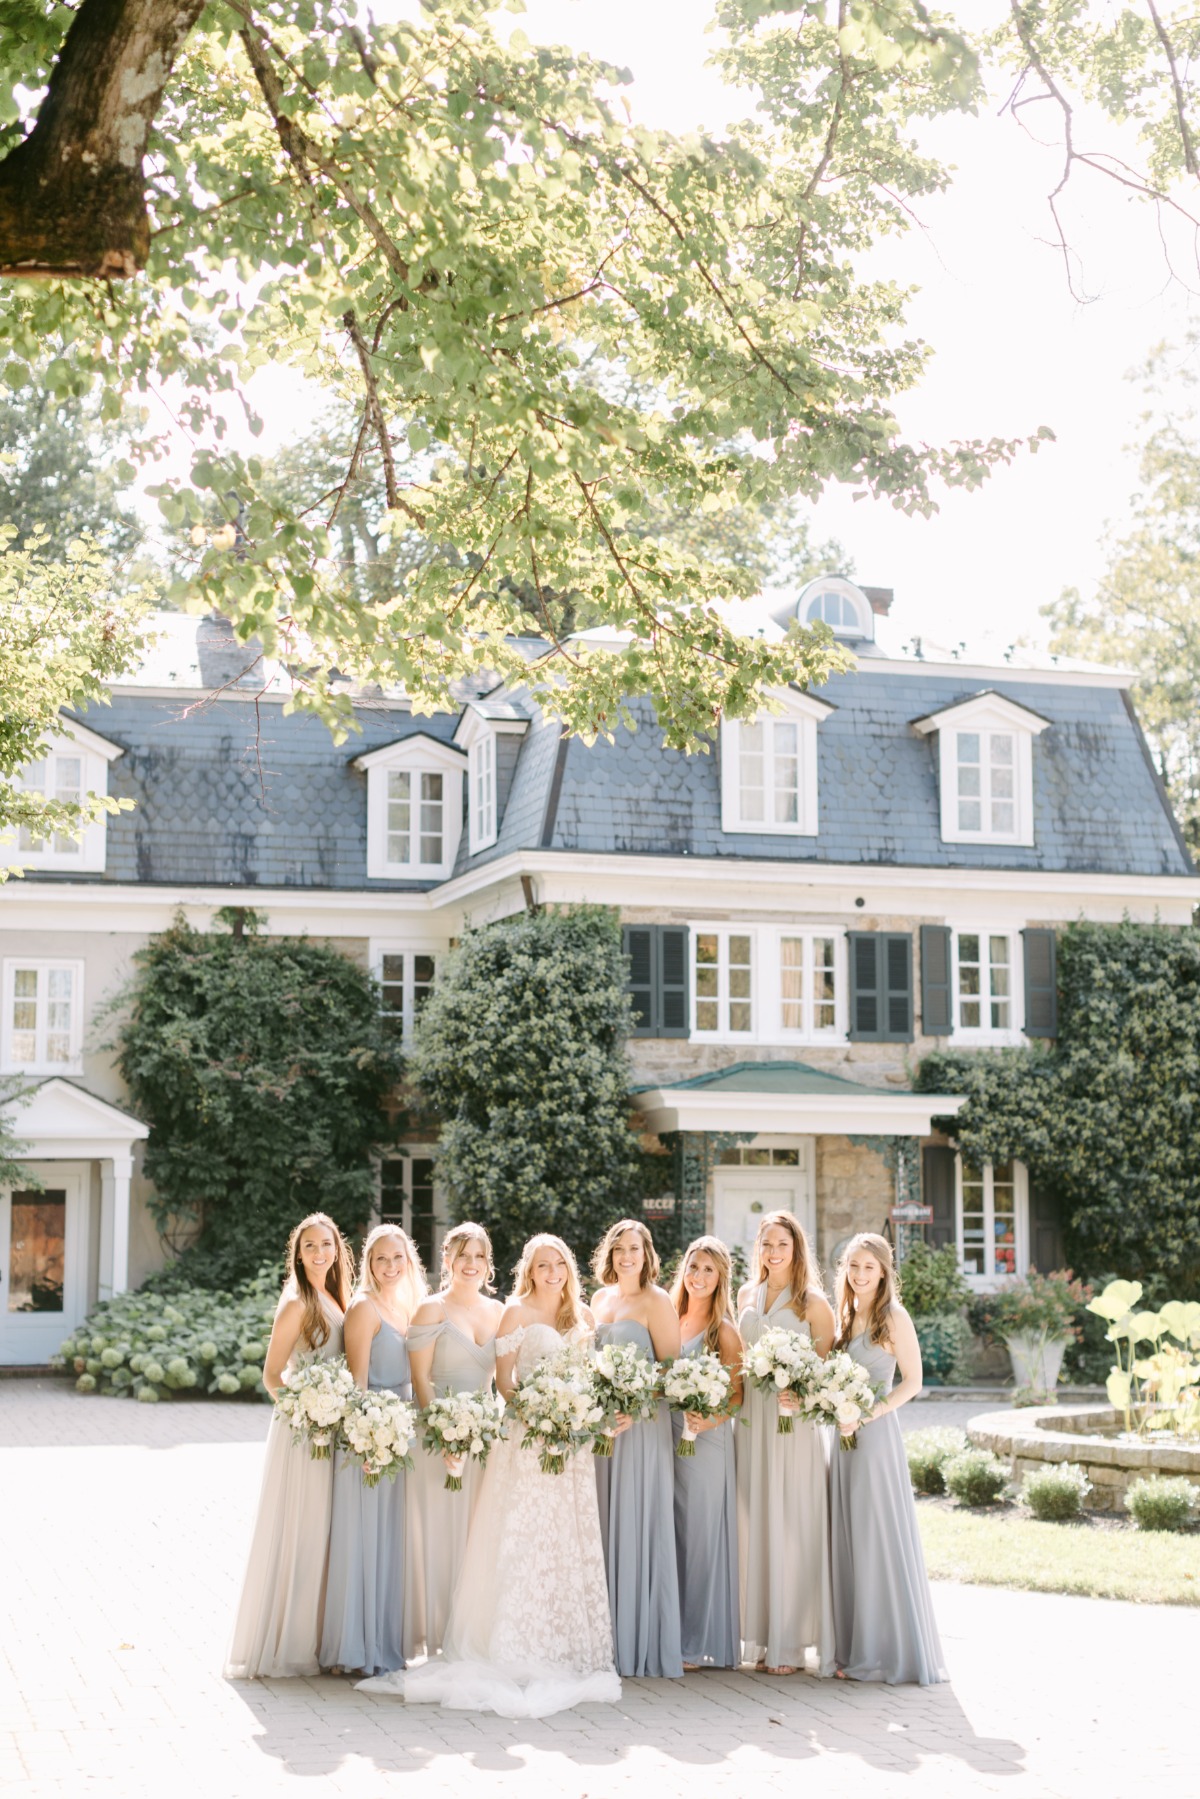 Portrait of bride and bridesmaids holding bouquets in front of inn